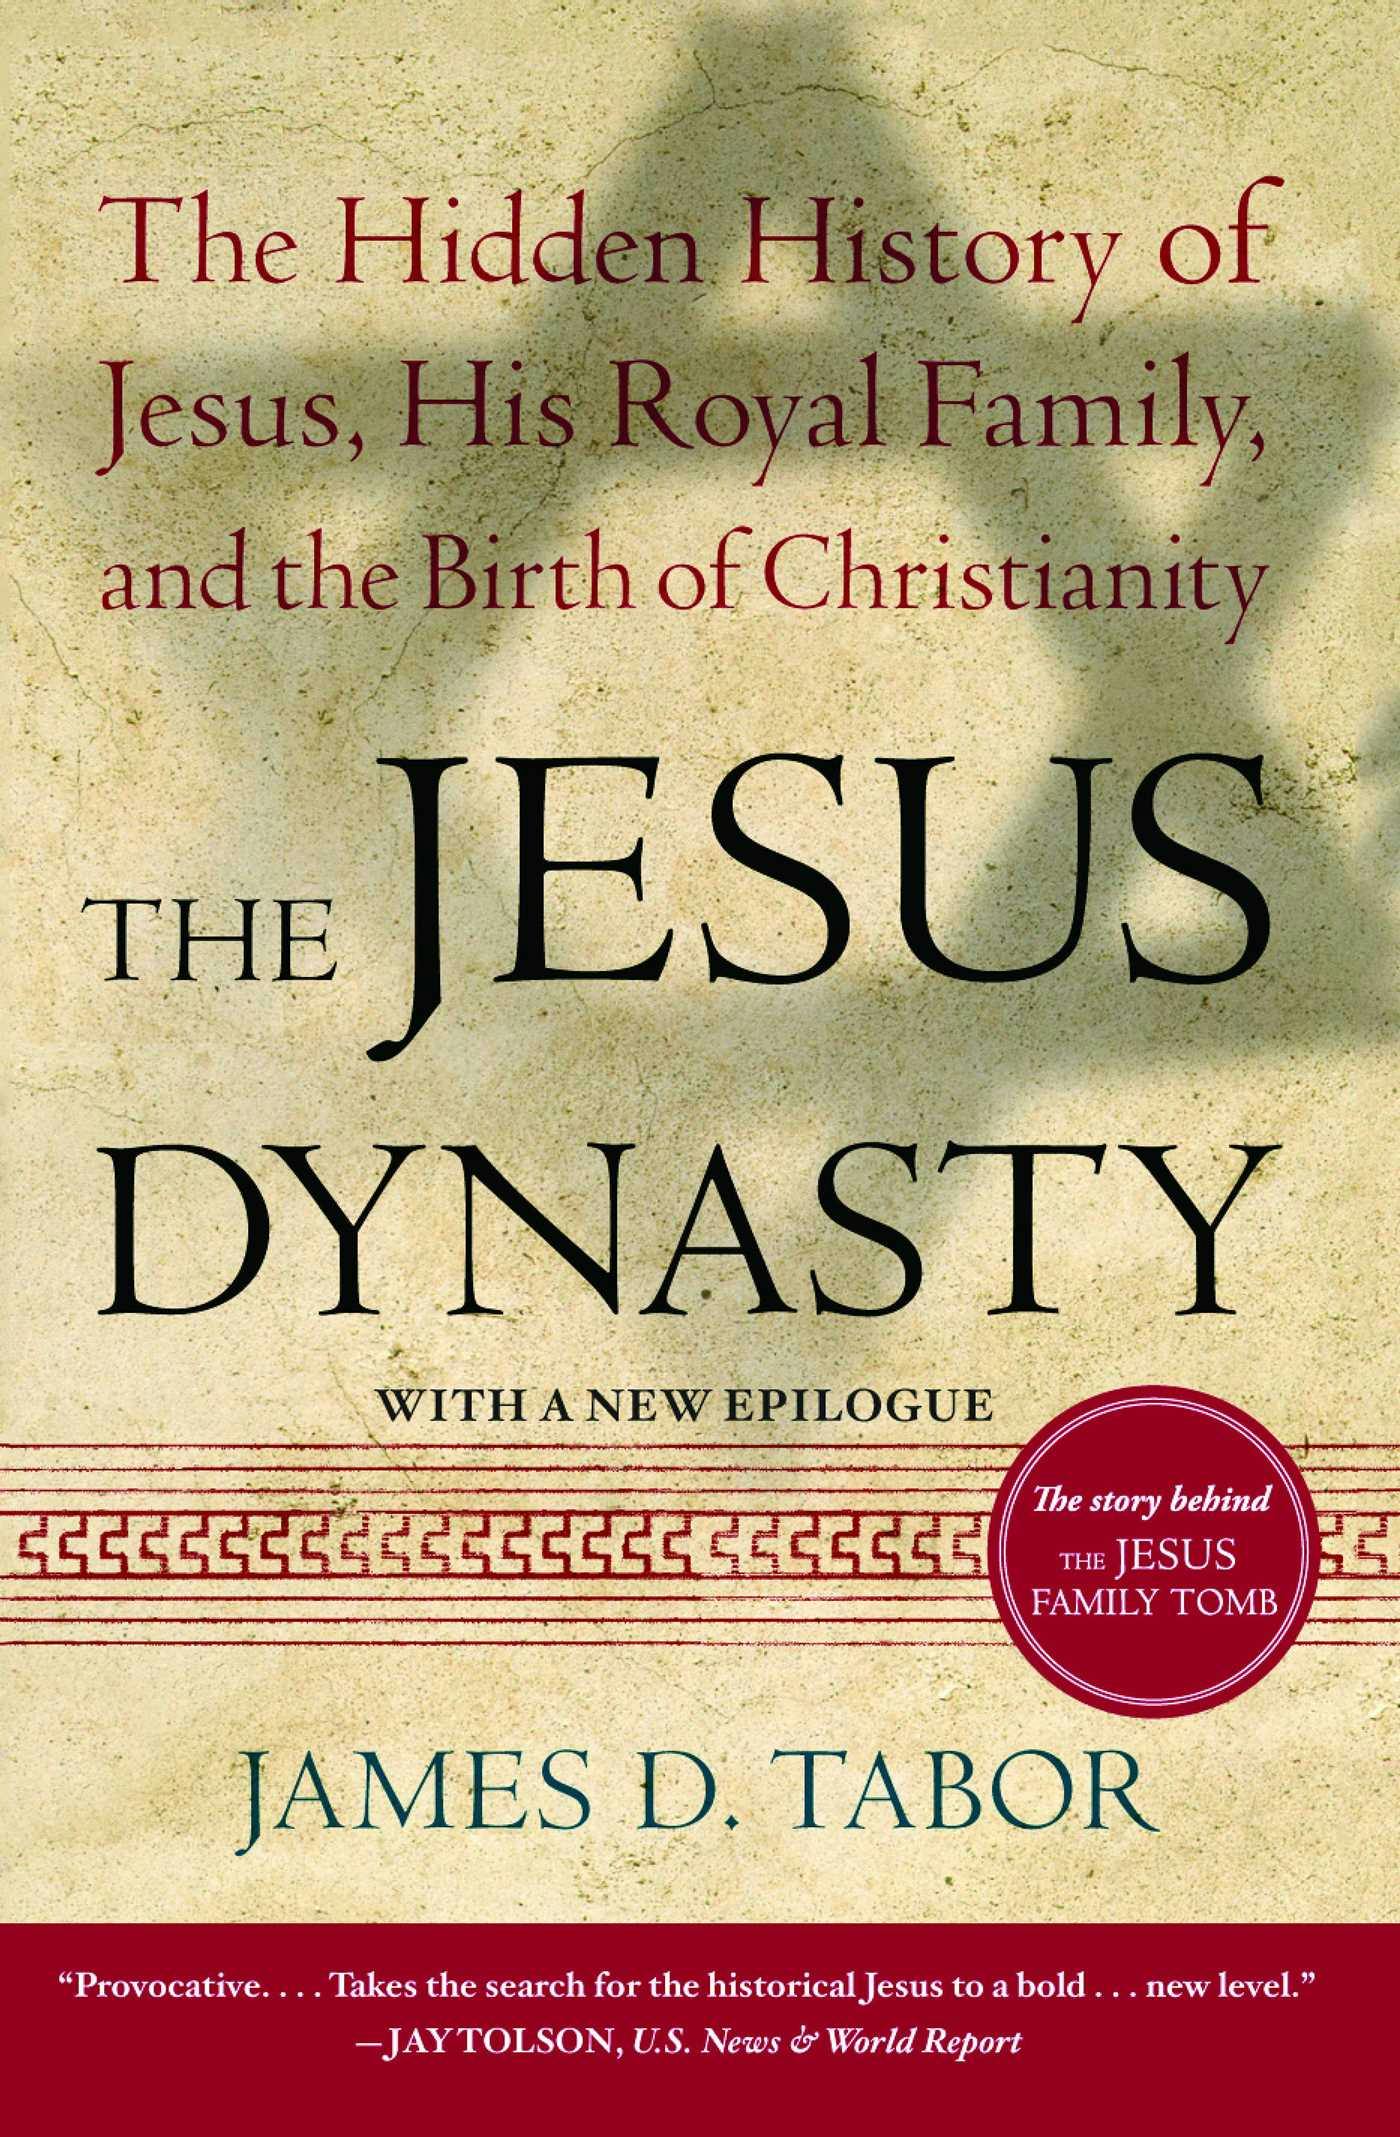 The Jesus Dynasty: The Hidden History of Jesus, His Royal Family, and the Birth of Christianity - James D. Tabor